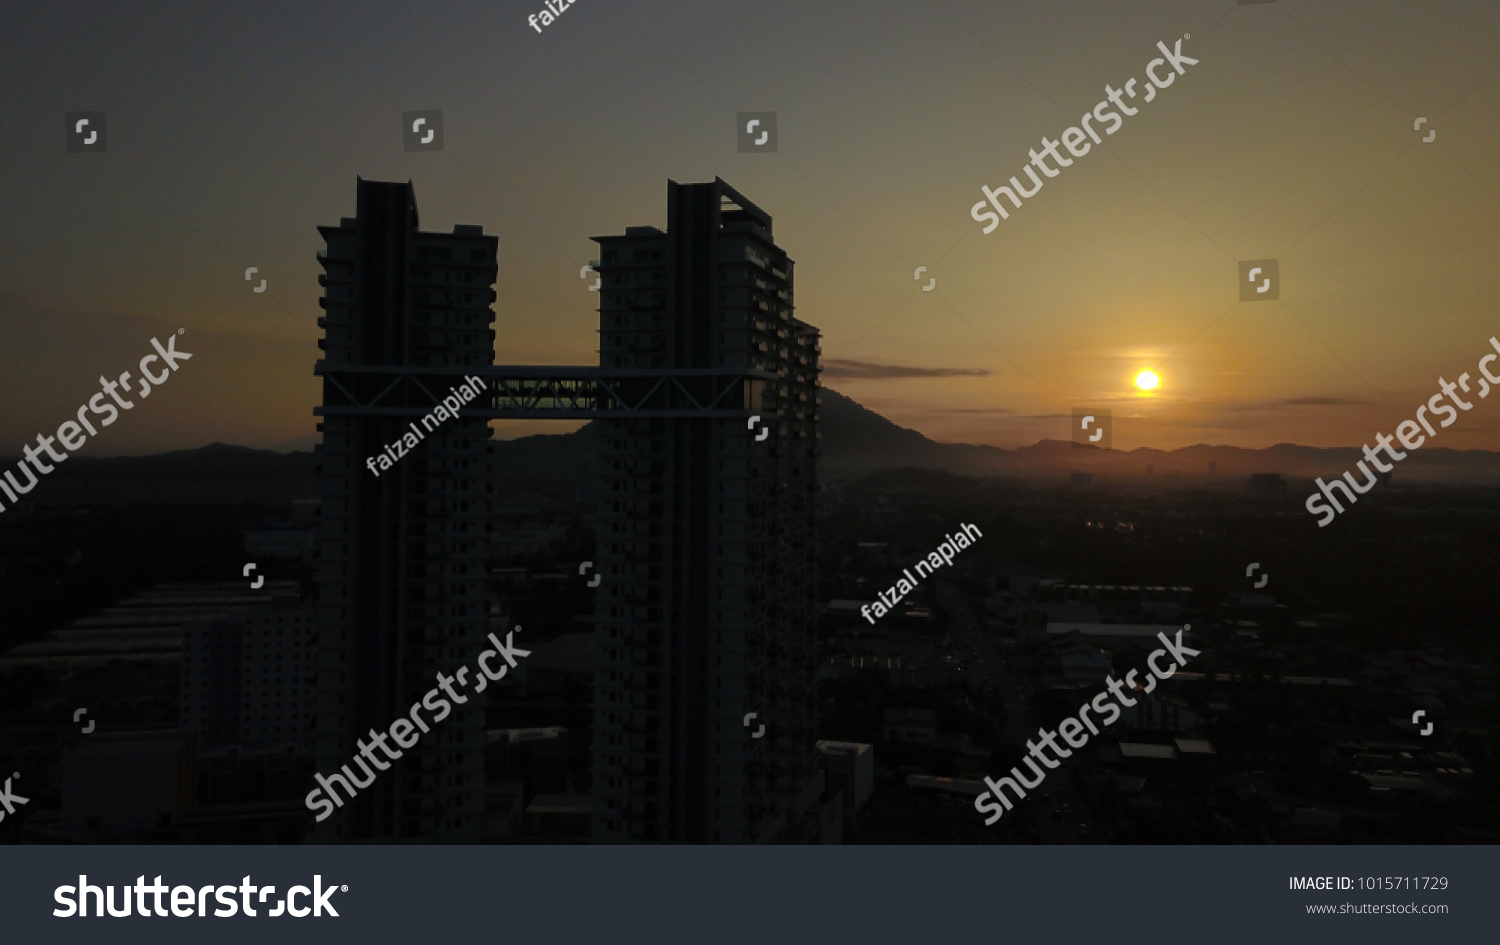 Construction of high-rise buildings on backgroun sunrise #1015711729